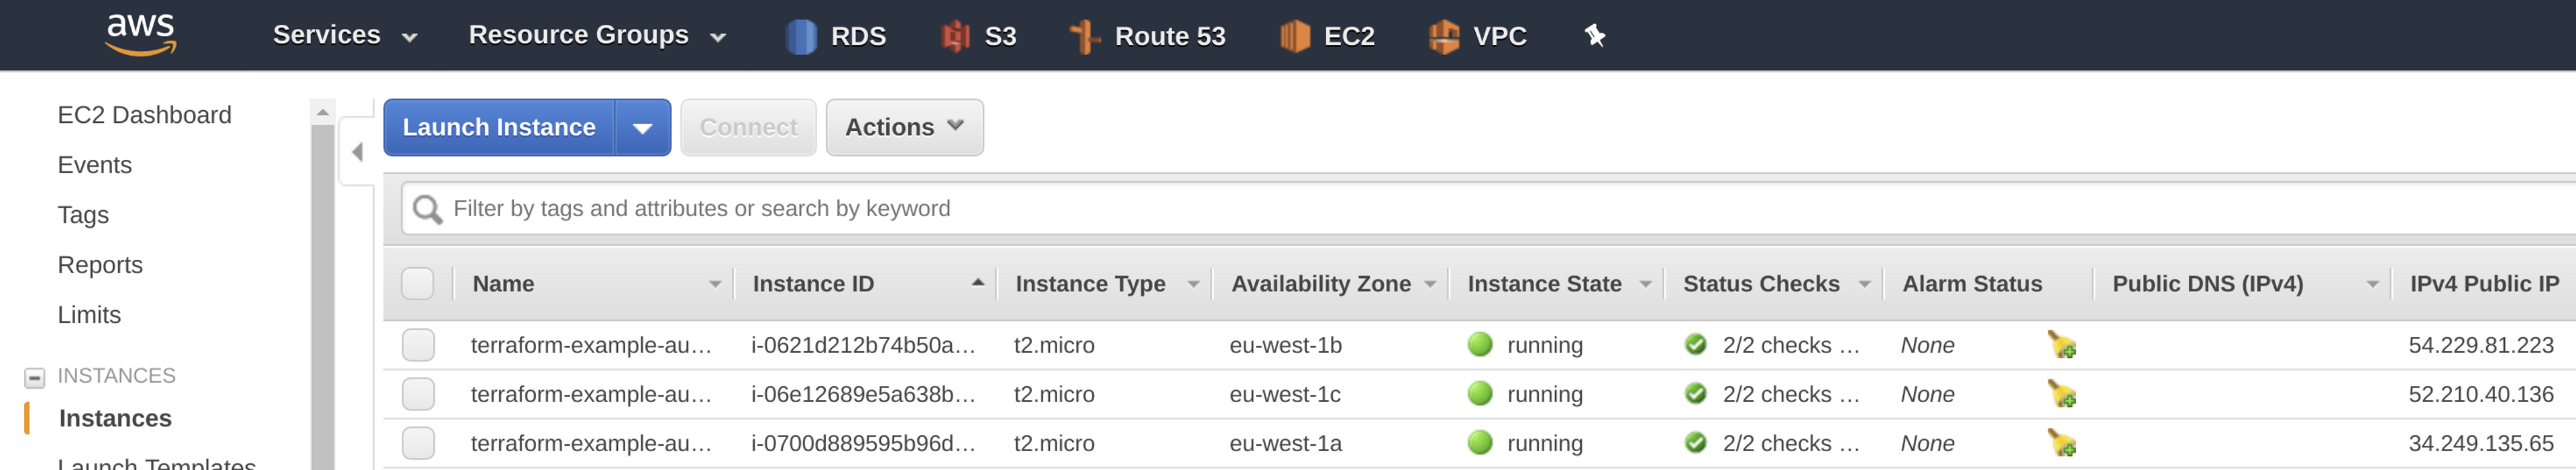 Instances in the EC2 dashboard